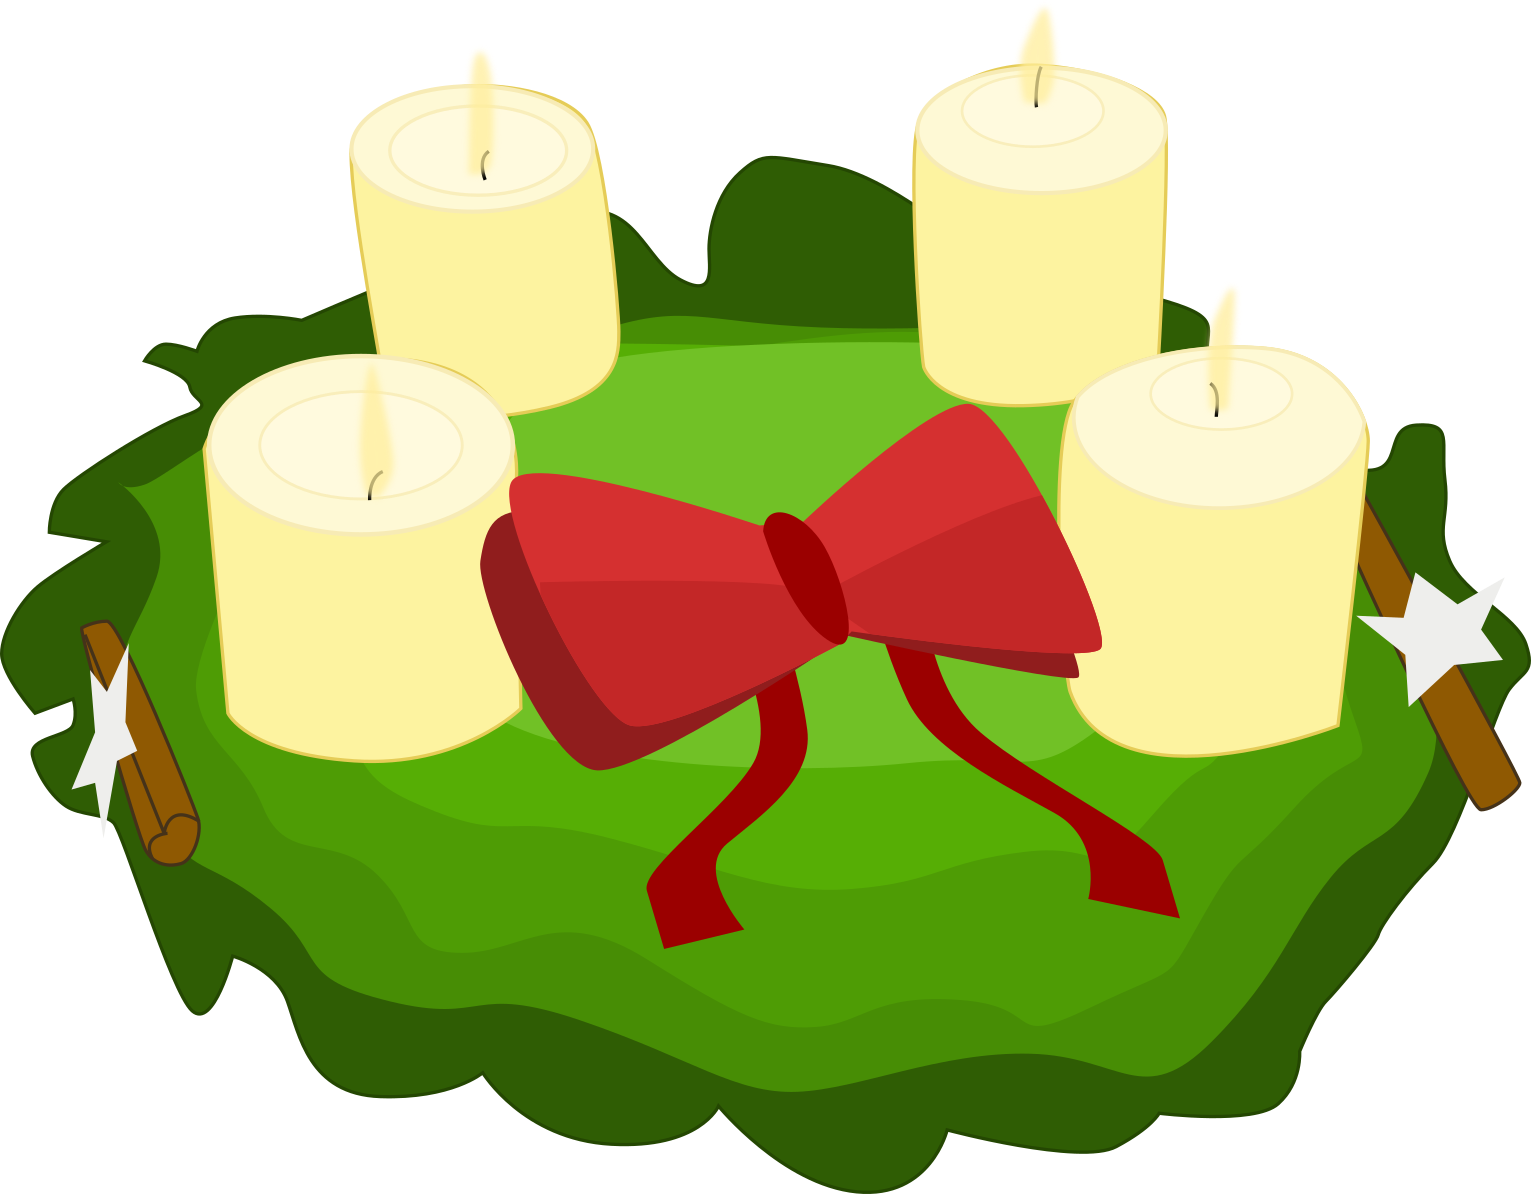 Clip Arts Related To : 1st sunday of advent clipart. view all Advent Wreath...